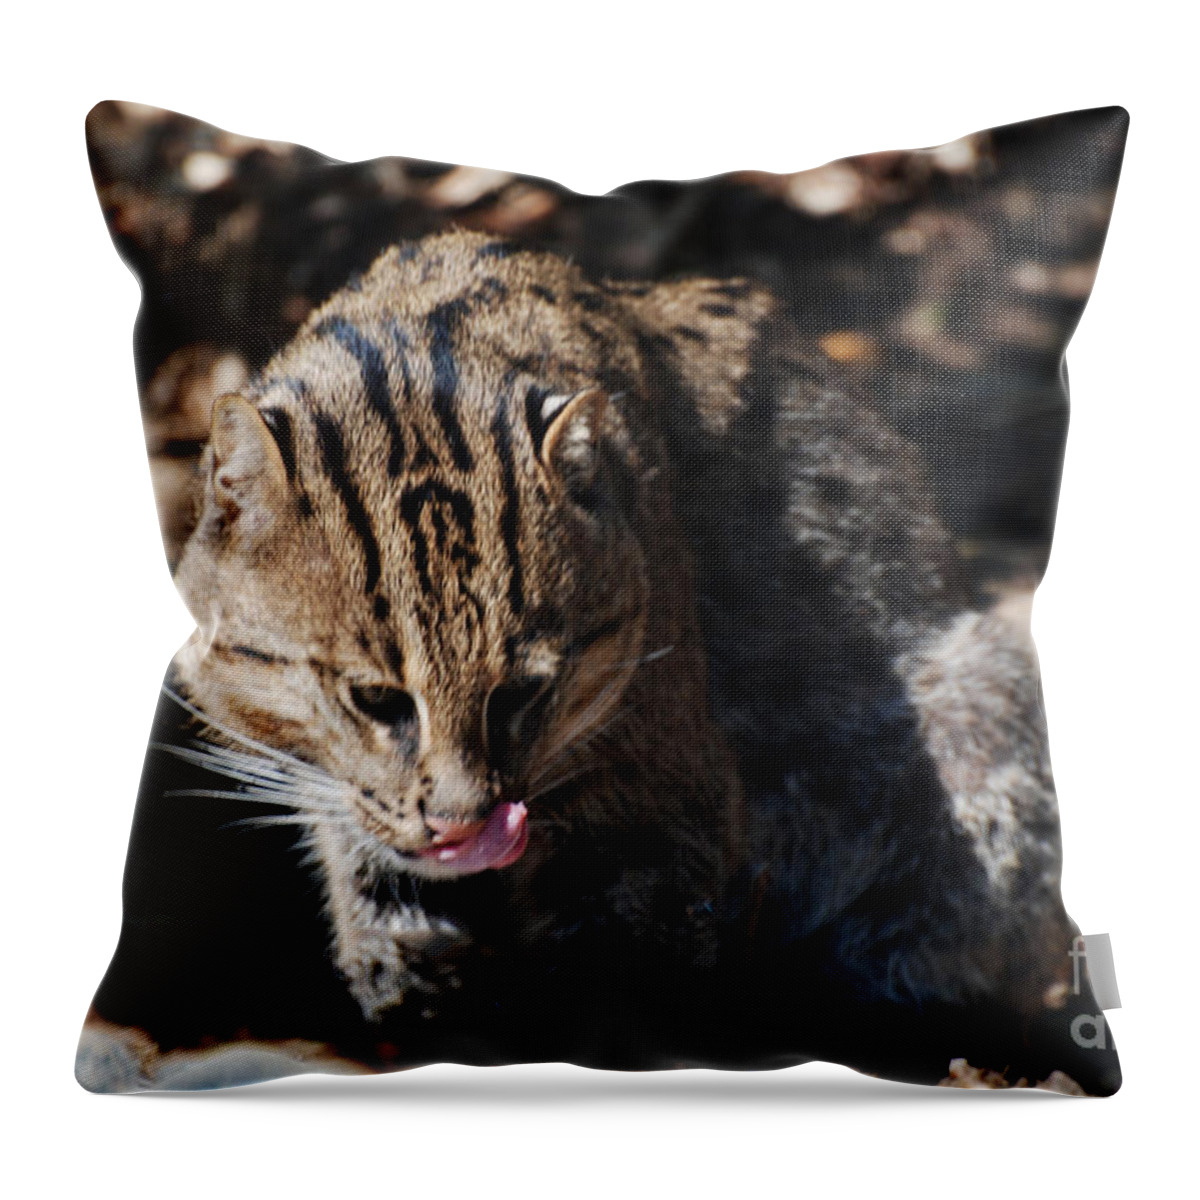 Fishing Cat Throw Pillow featuring the photograph Fishing Cat by DejaVu Designs